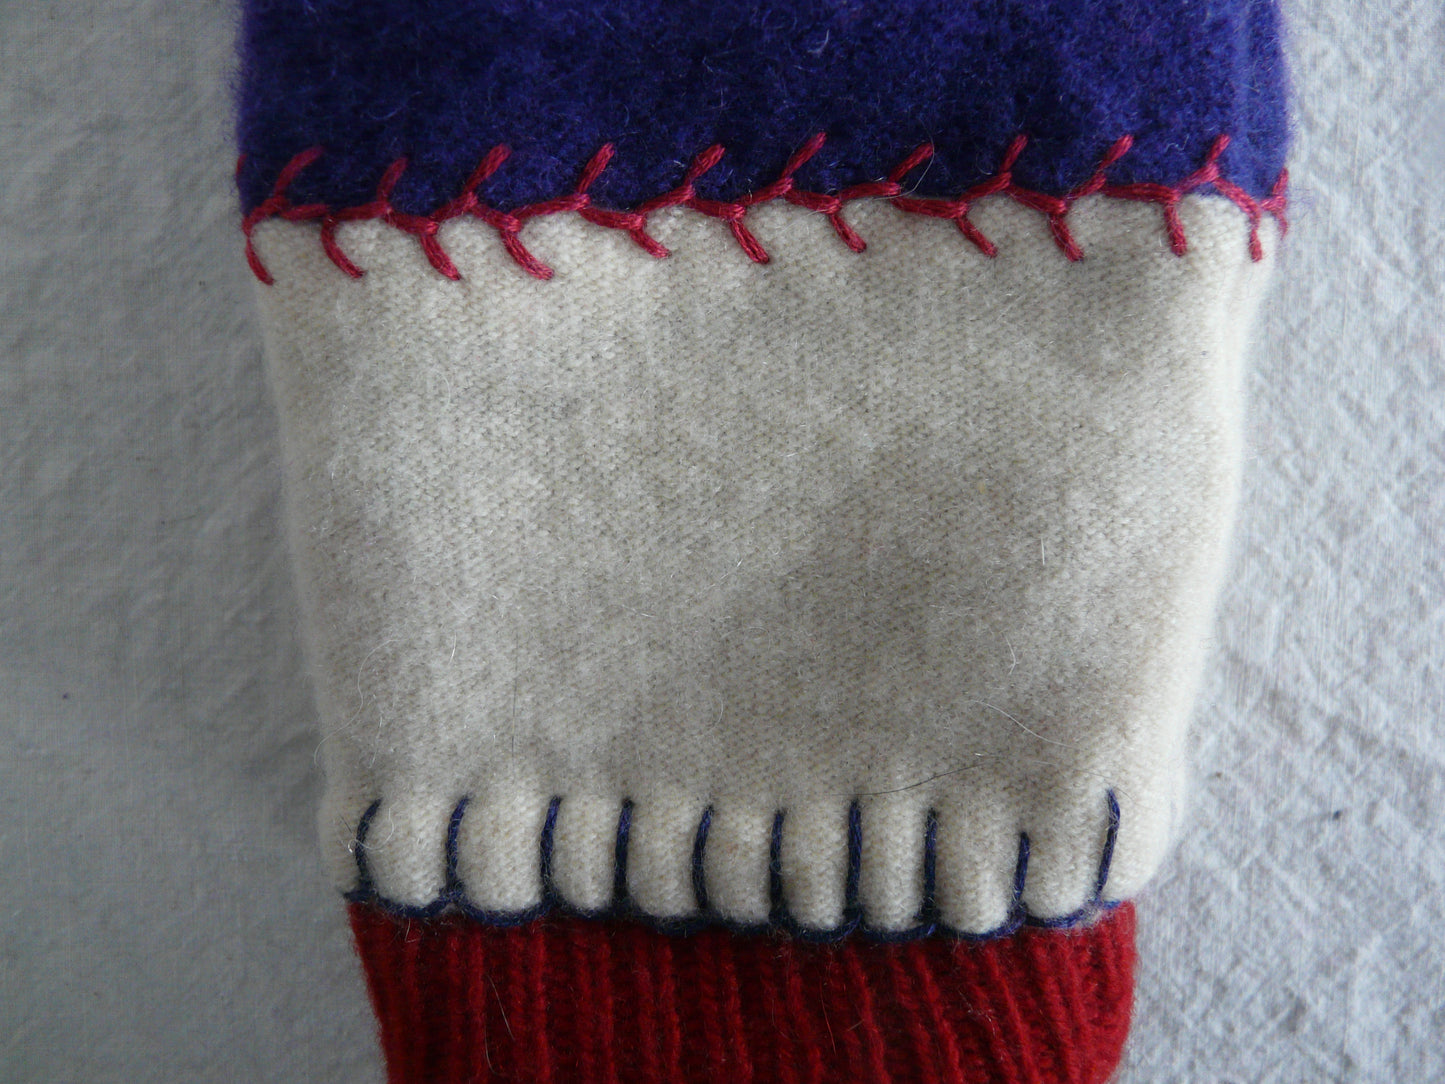 Single Cashmere Mittens - Red, White, and Blue!